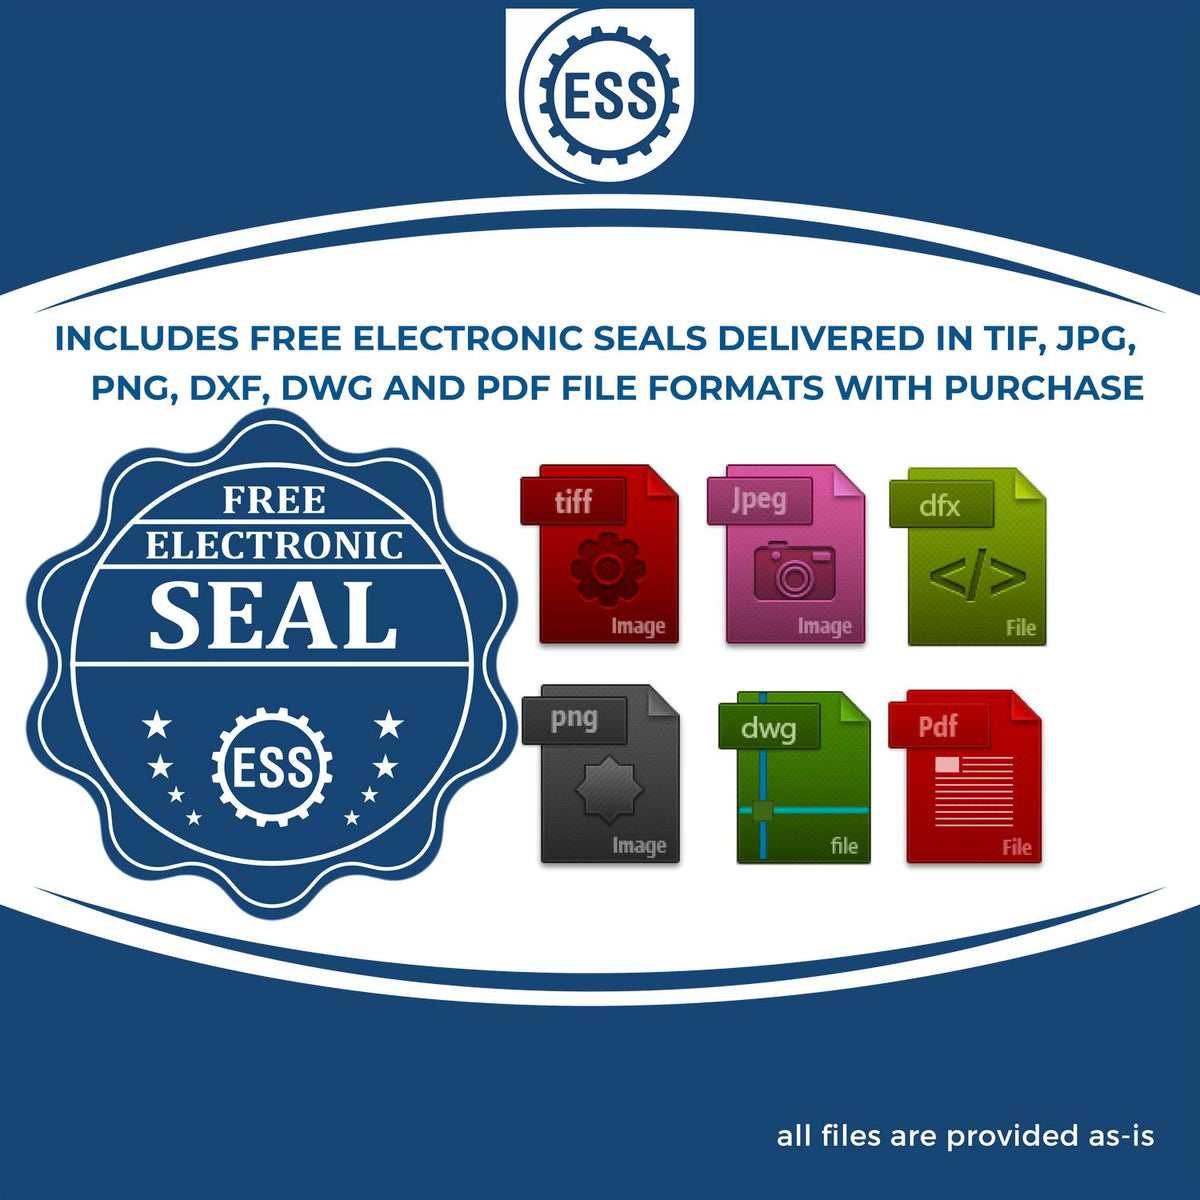 An infographic for the free electronic seal for the Heavy-Duty Puerto Rico Rectangular Notary Stamp illustrating the different file type icons such as DXF, DWG, TIF, JPG and PNG.